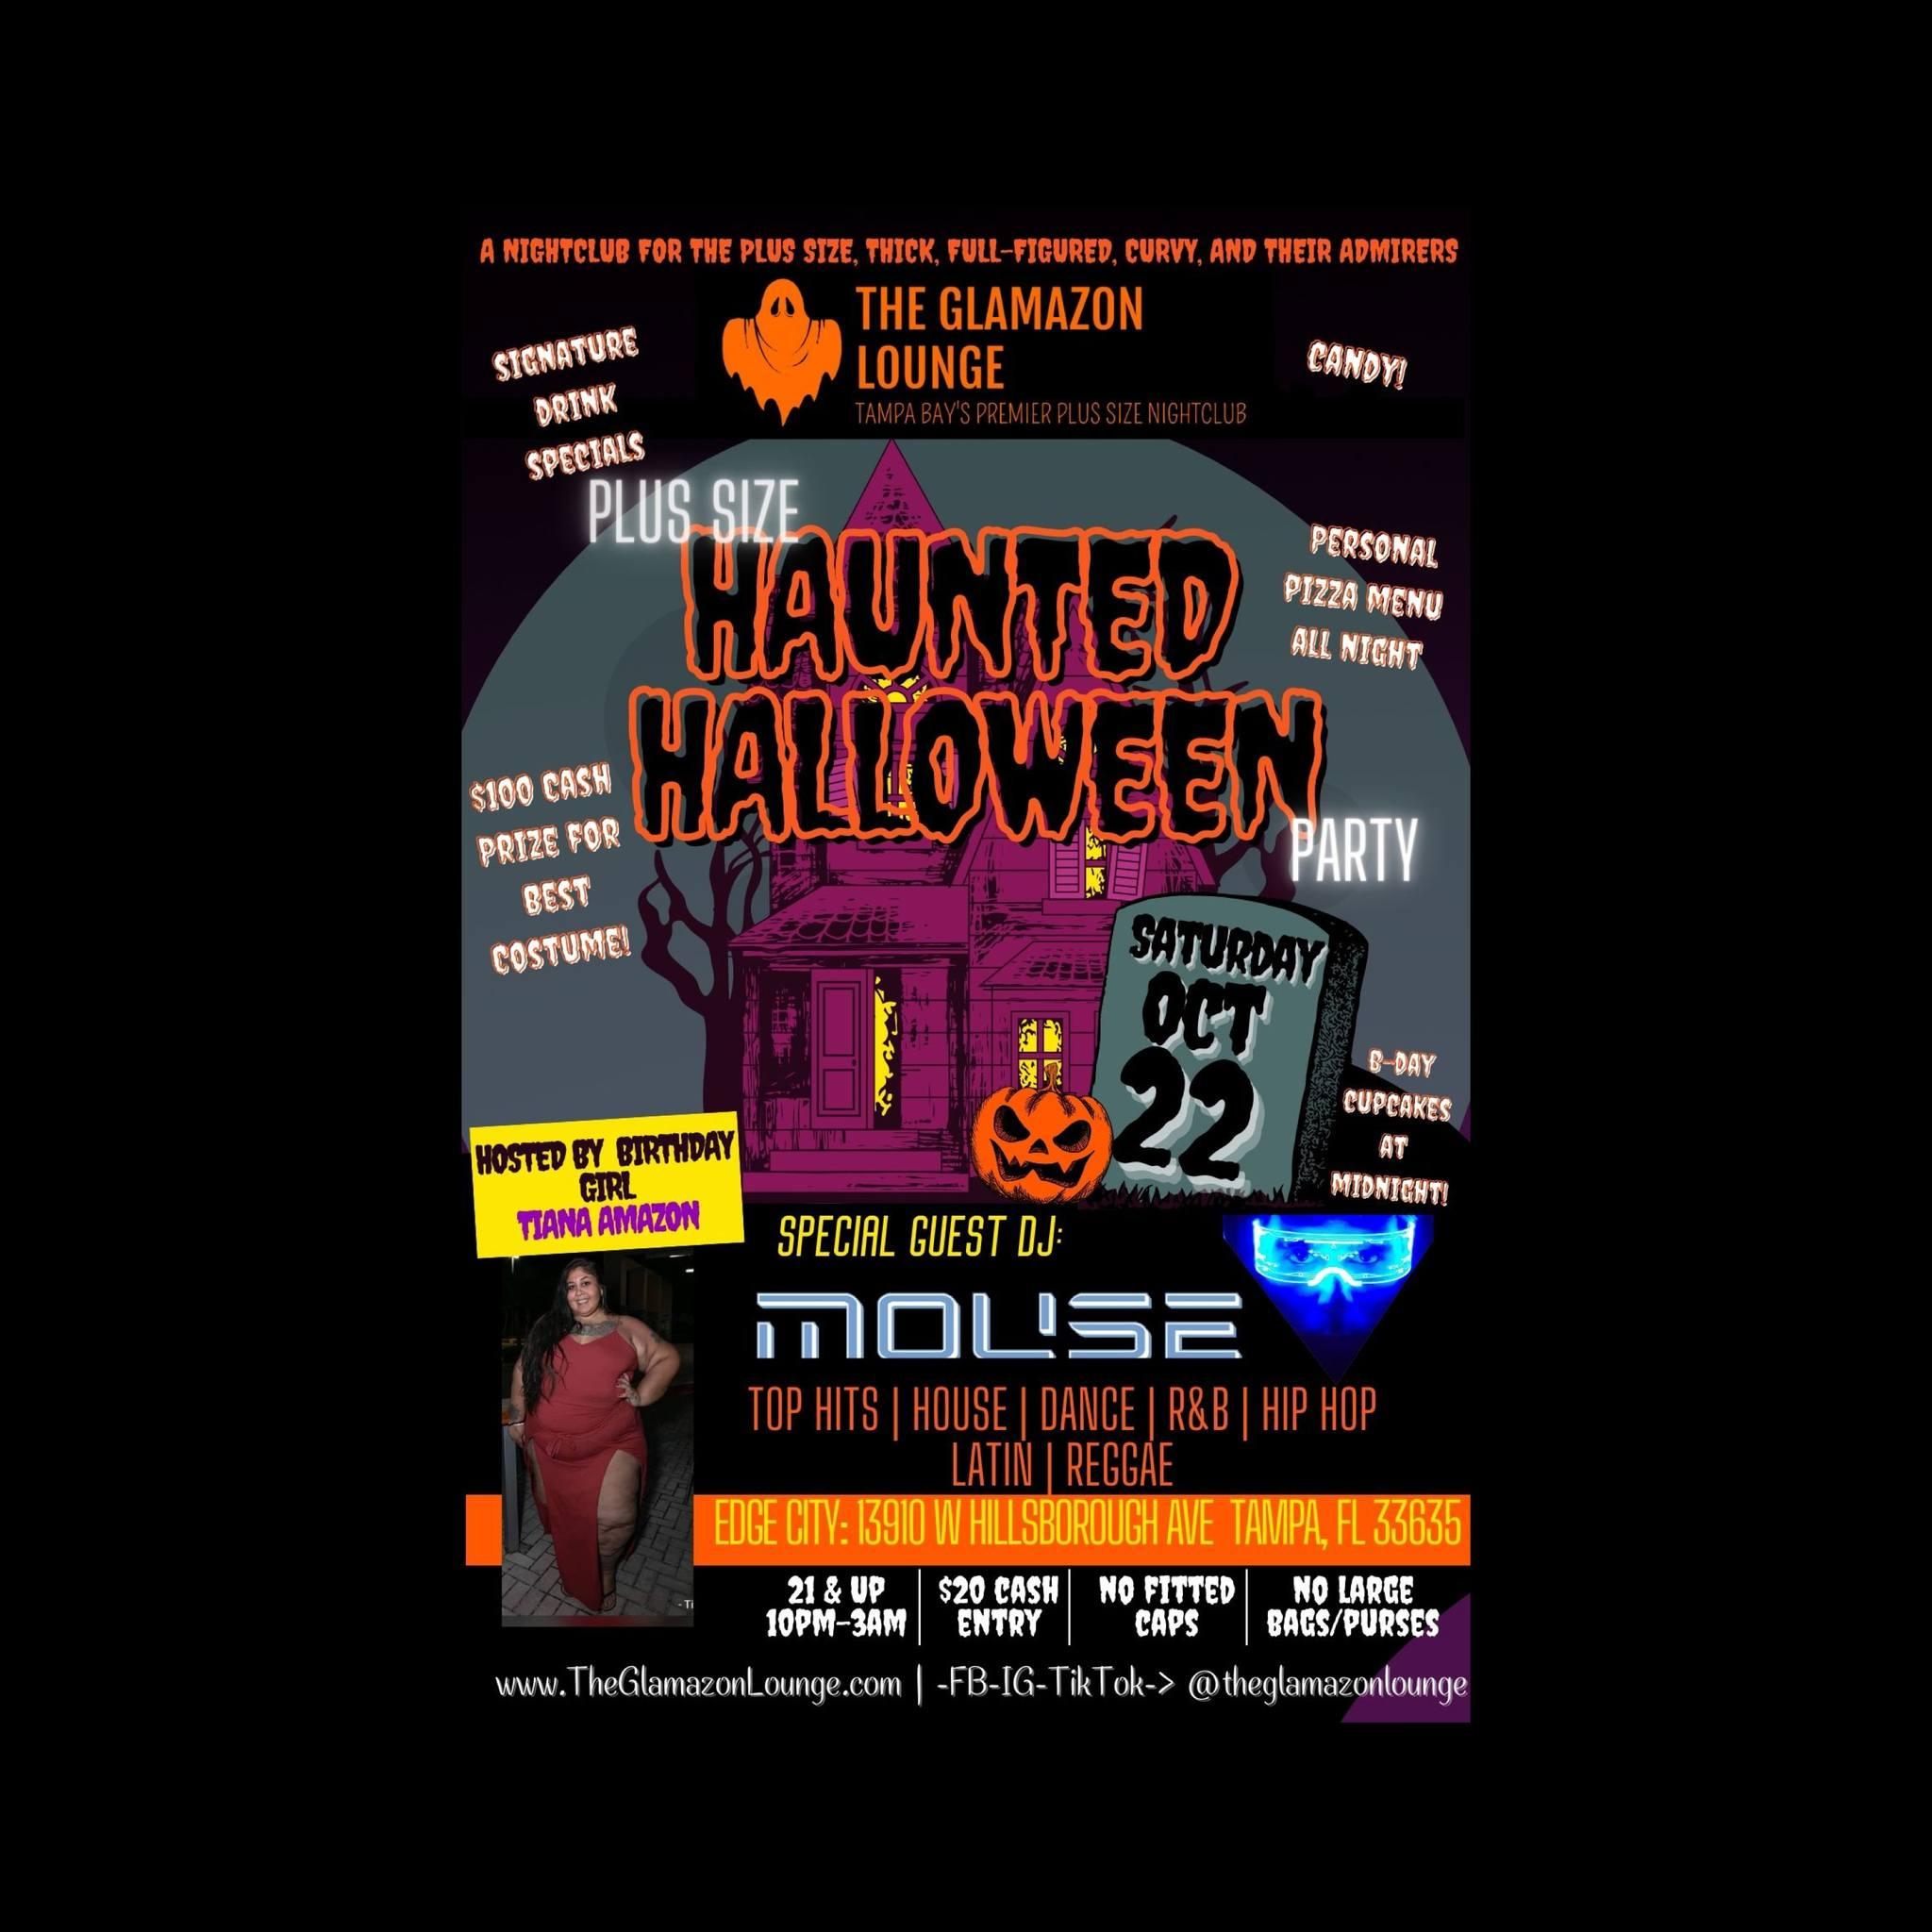 Plus Size Haunted Halloween Party :: Tampa, FL
Sat Oct 22, 10:00 PM - Sun Oct 23, 3:00 AM
in 3 days